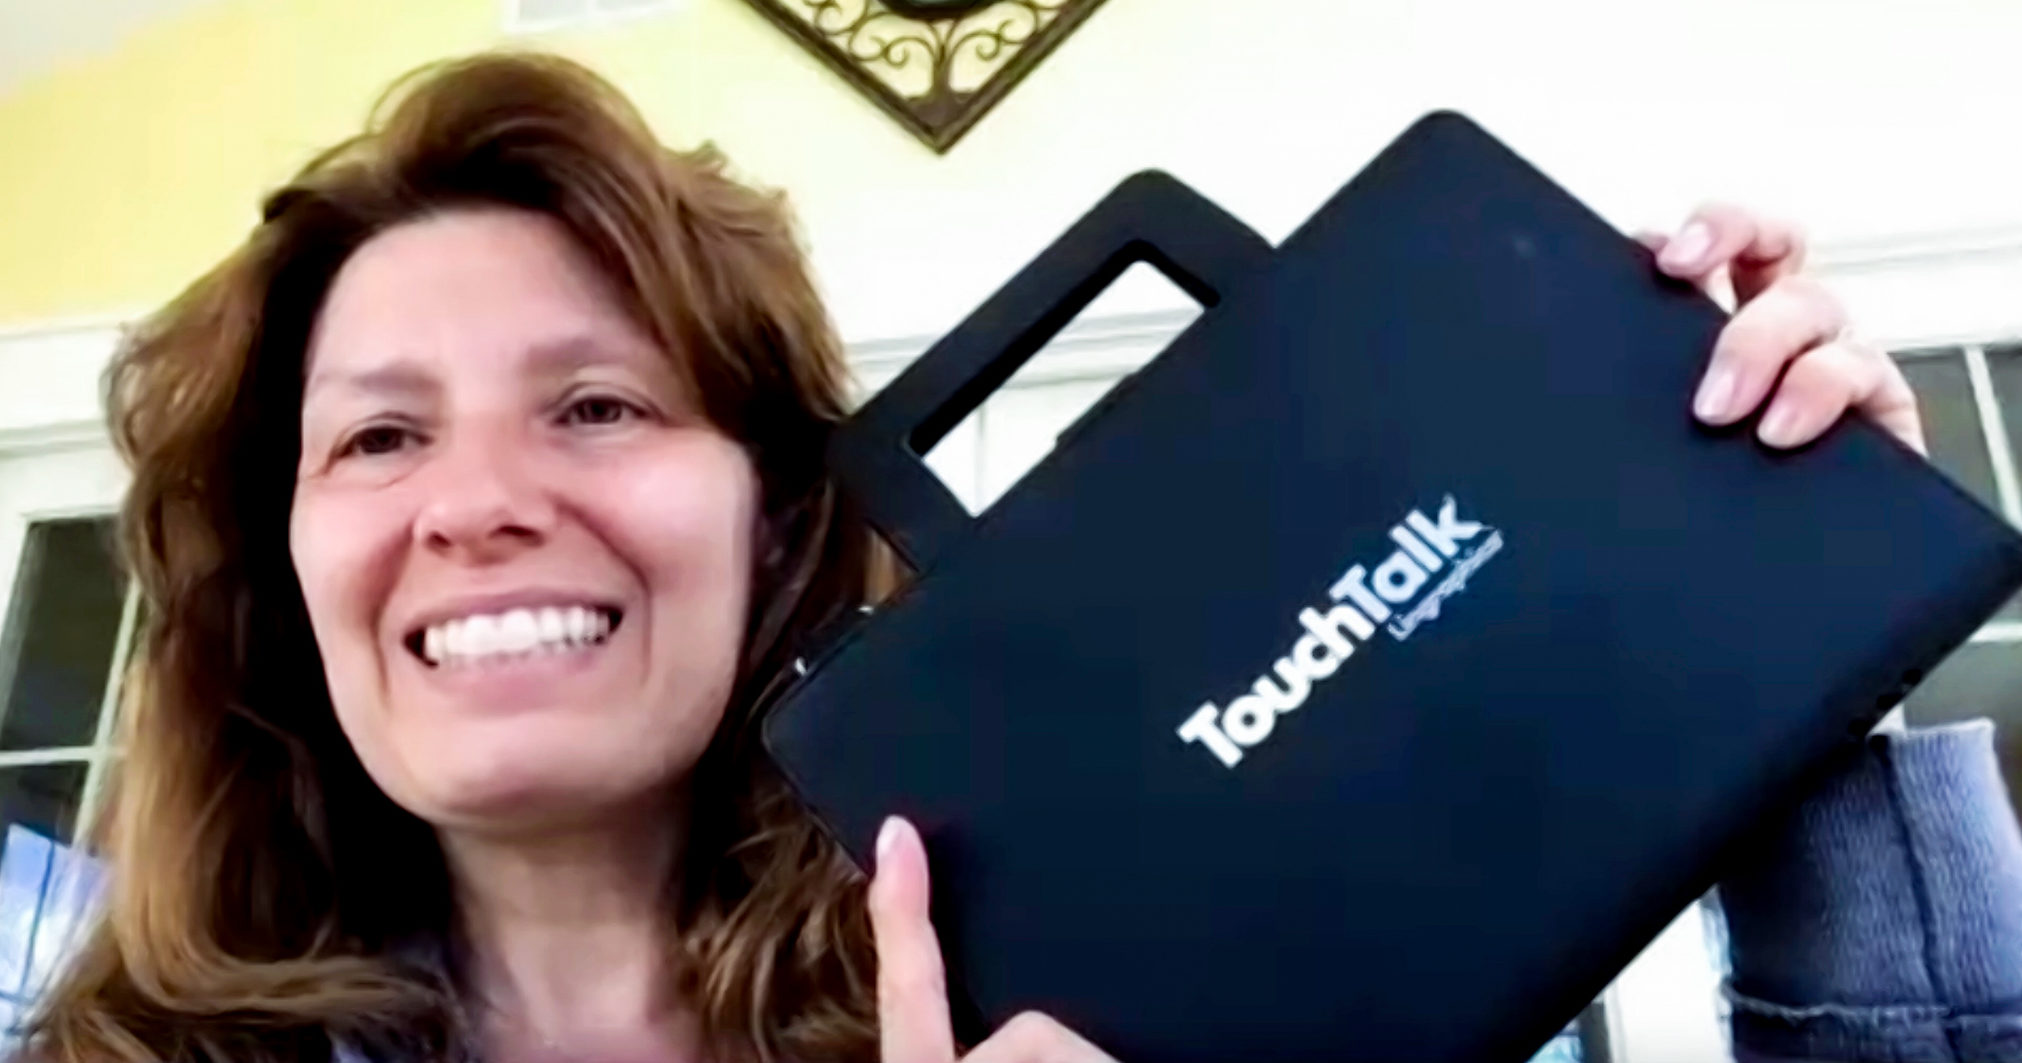 Female HopeHealth Speech Language Pathologist Joni Hodges holds up one of her favorite tools, an augmentative and alternative communication device from Lingraphica. The tablet makes it easy for people with a wide range of abilities to communicate in several ways.